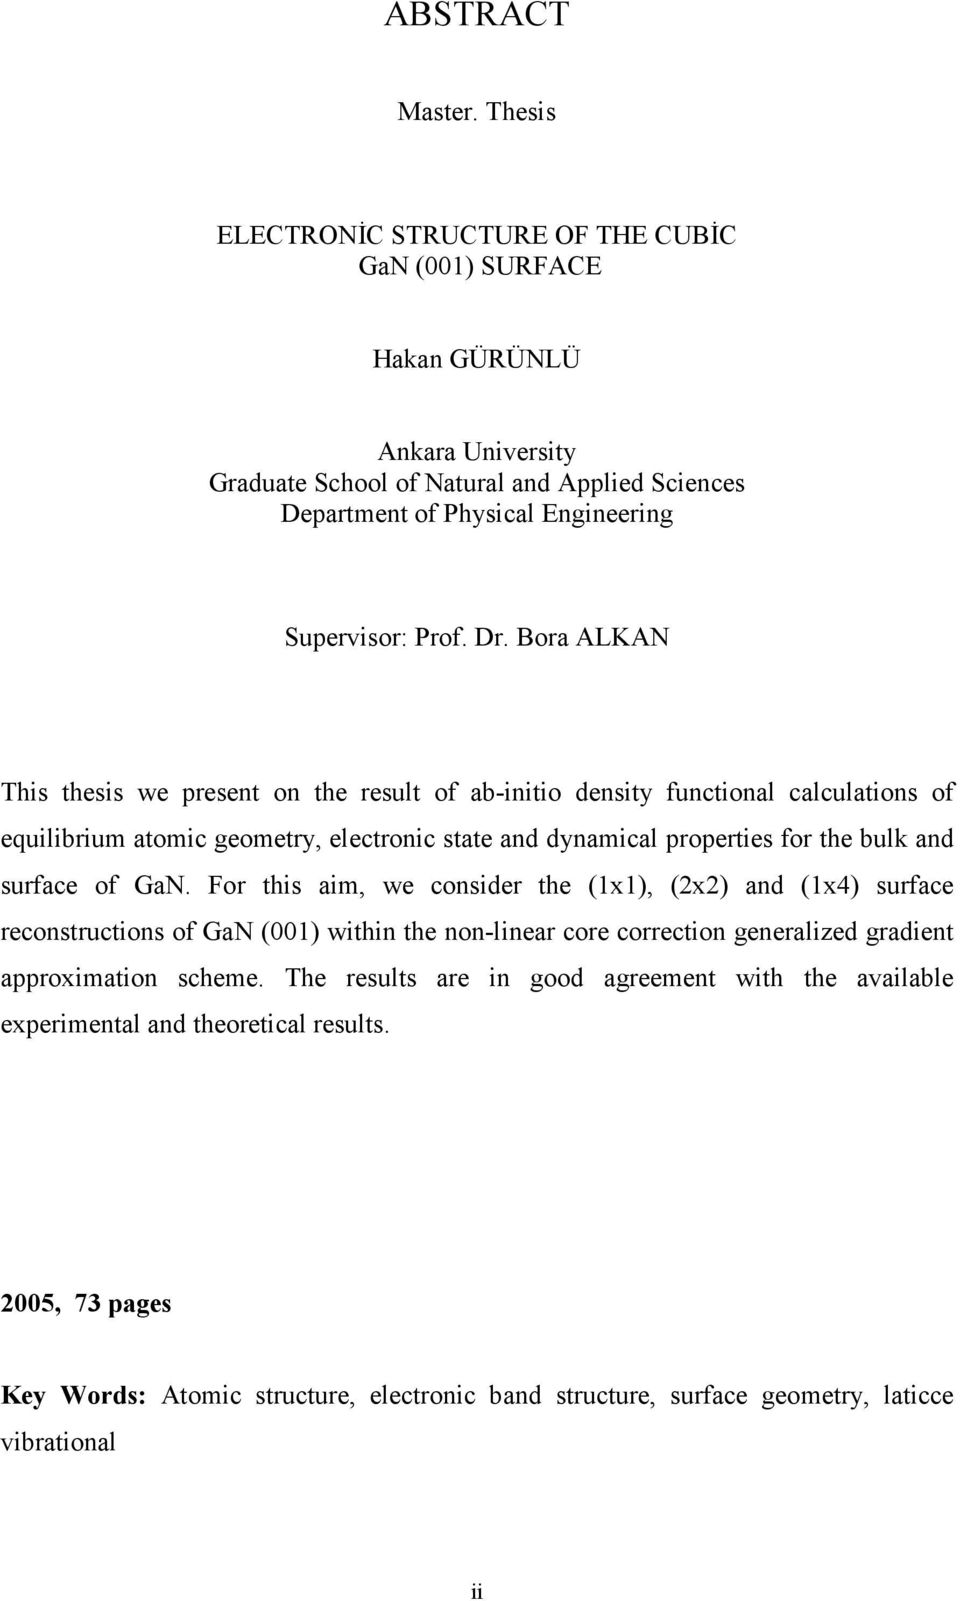 D. Boa ALKAN This thesis we pesent on the esult of ab-initio density functional calculations of equilibium atomic geomety, electonic state and dynamical popeties fo the bulk and